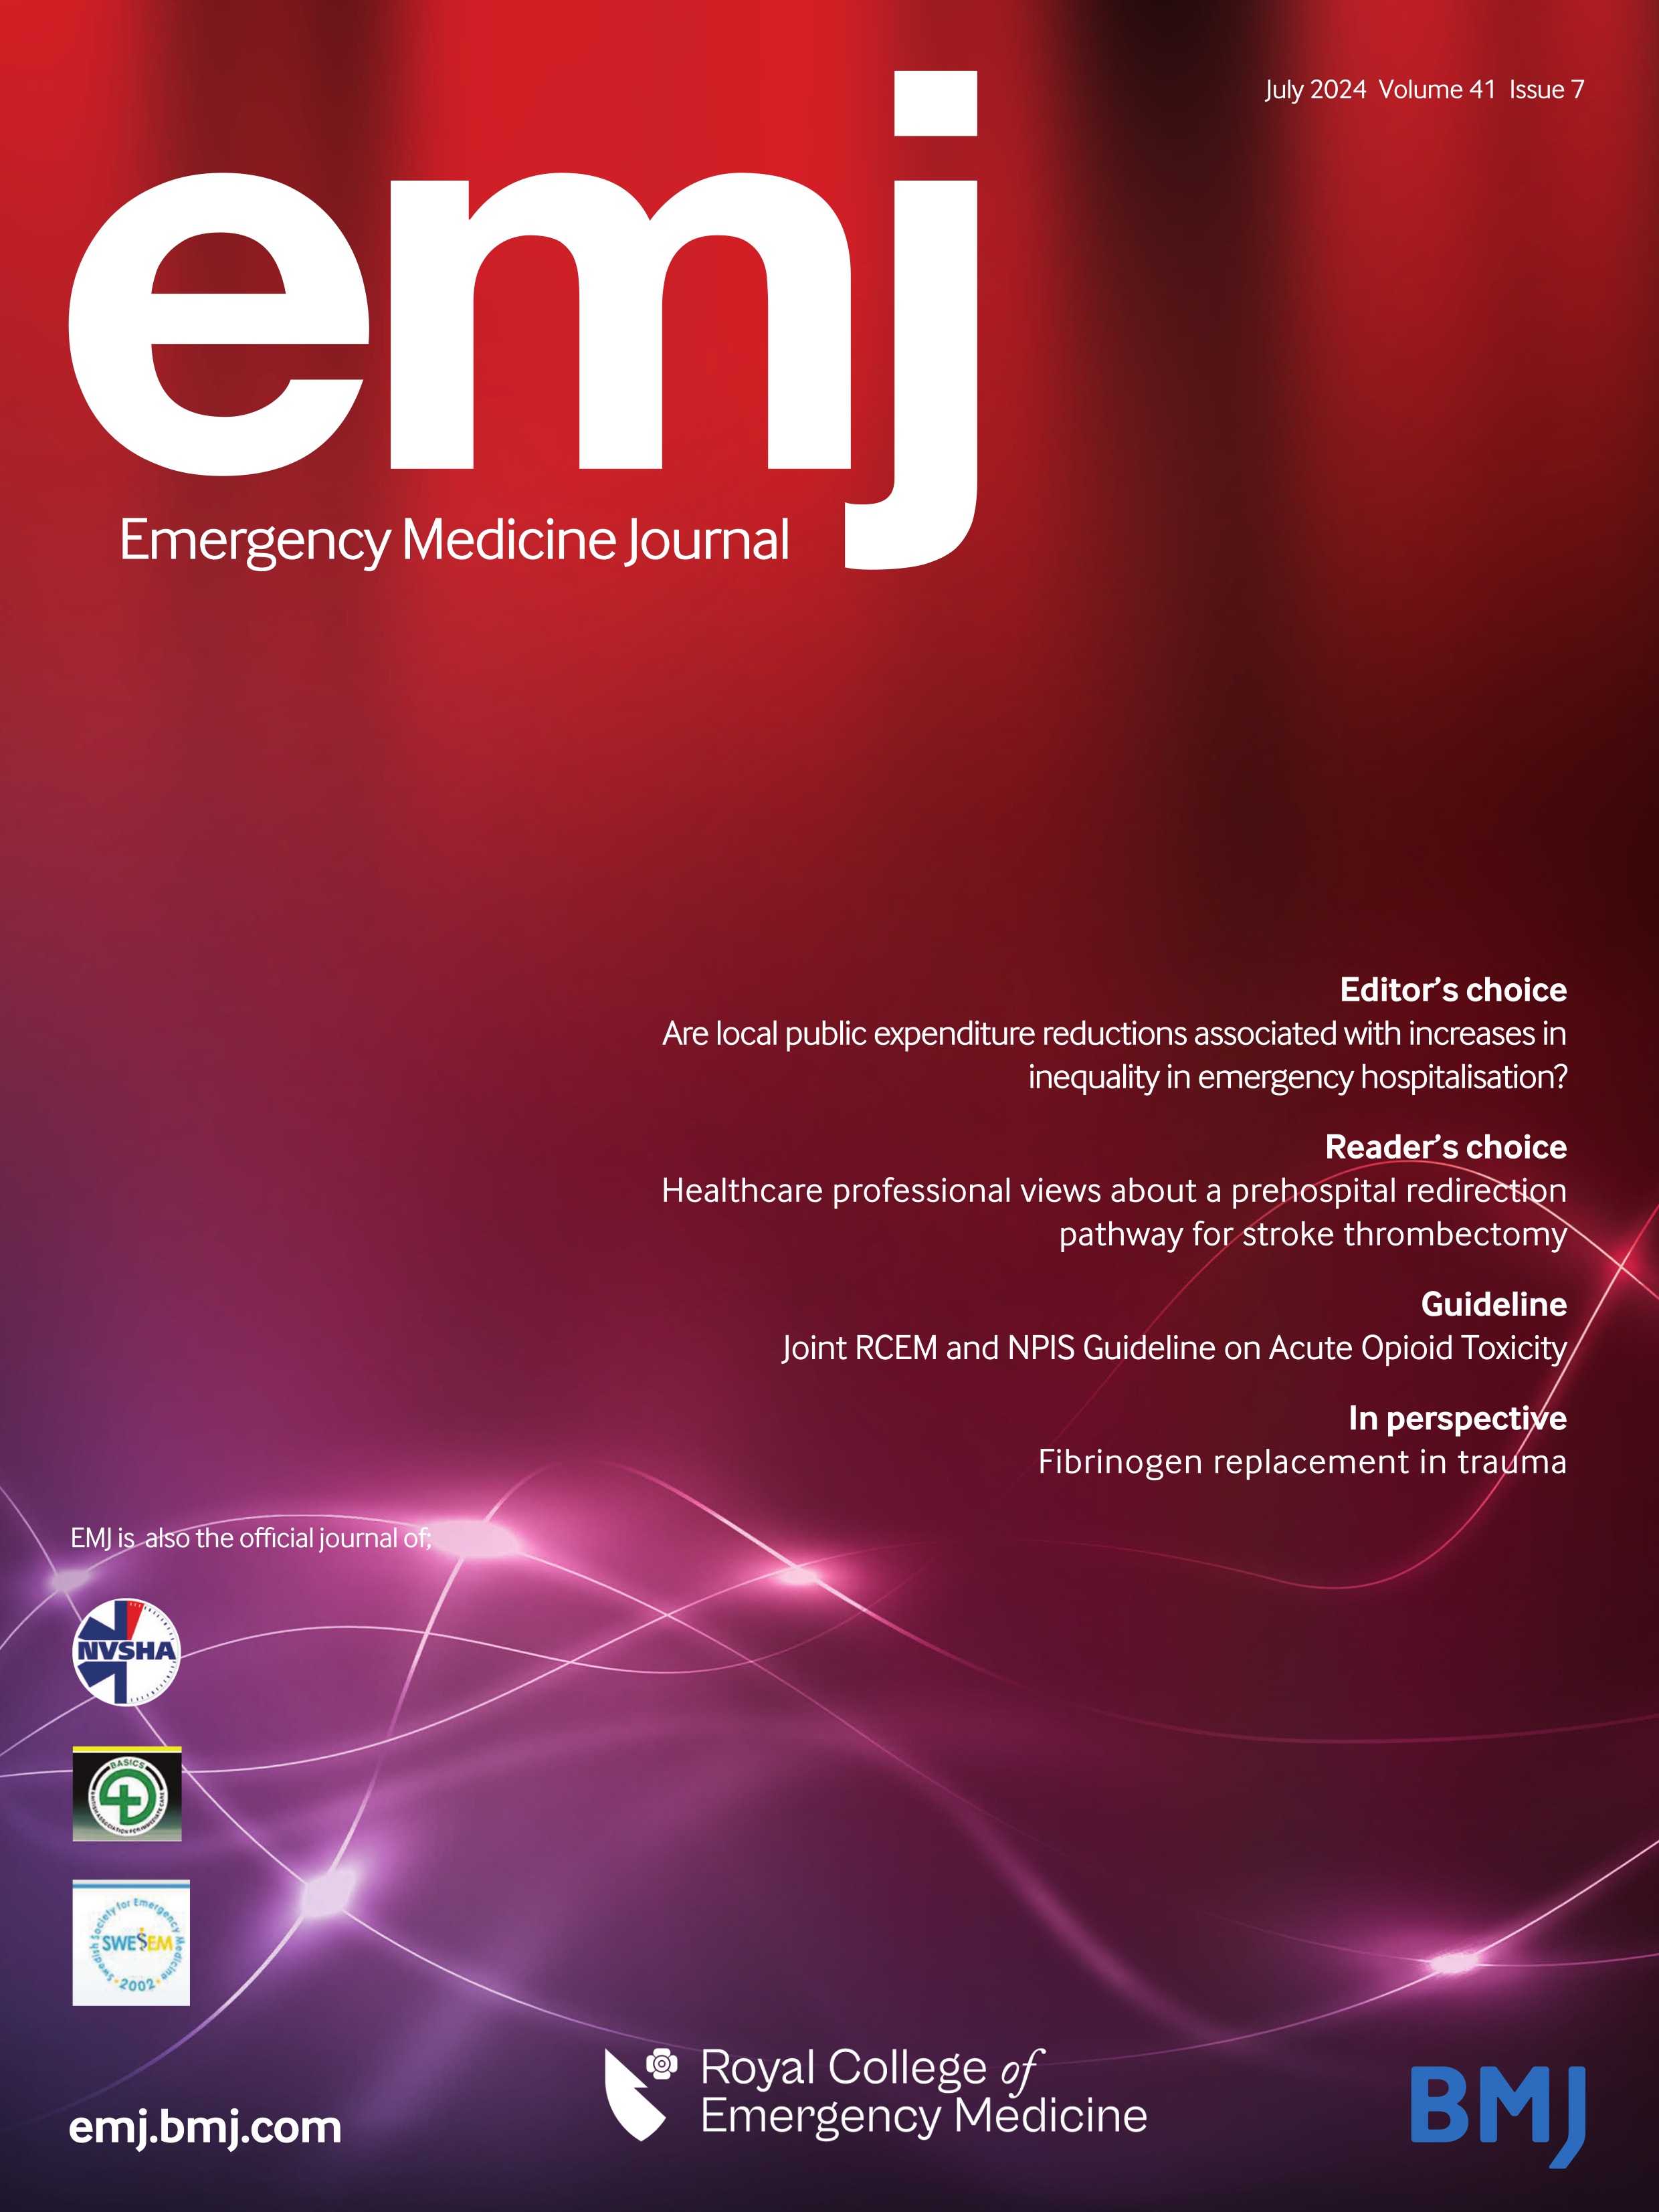 Management and outcome of oncological patients under immune checkpoint inhibitors presenting at the emergency department